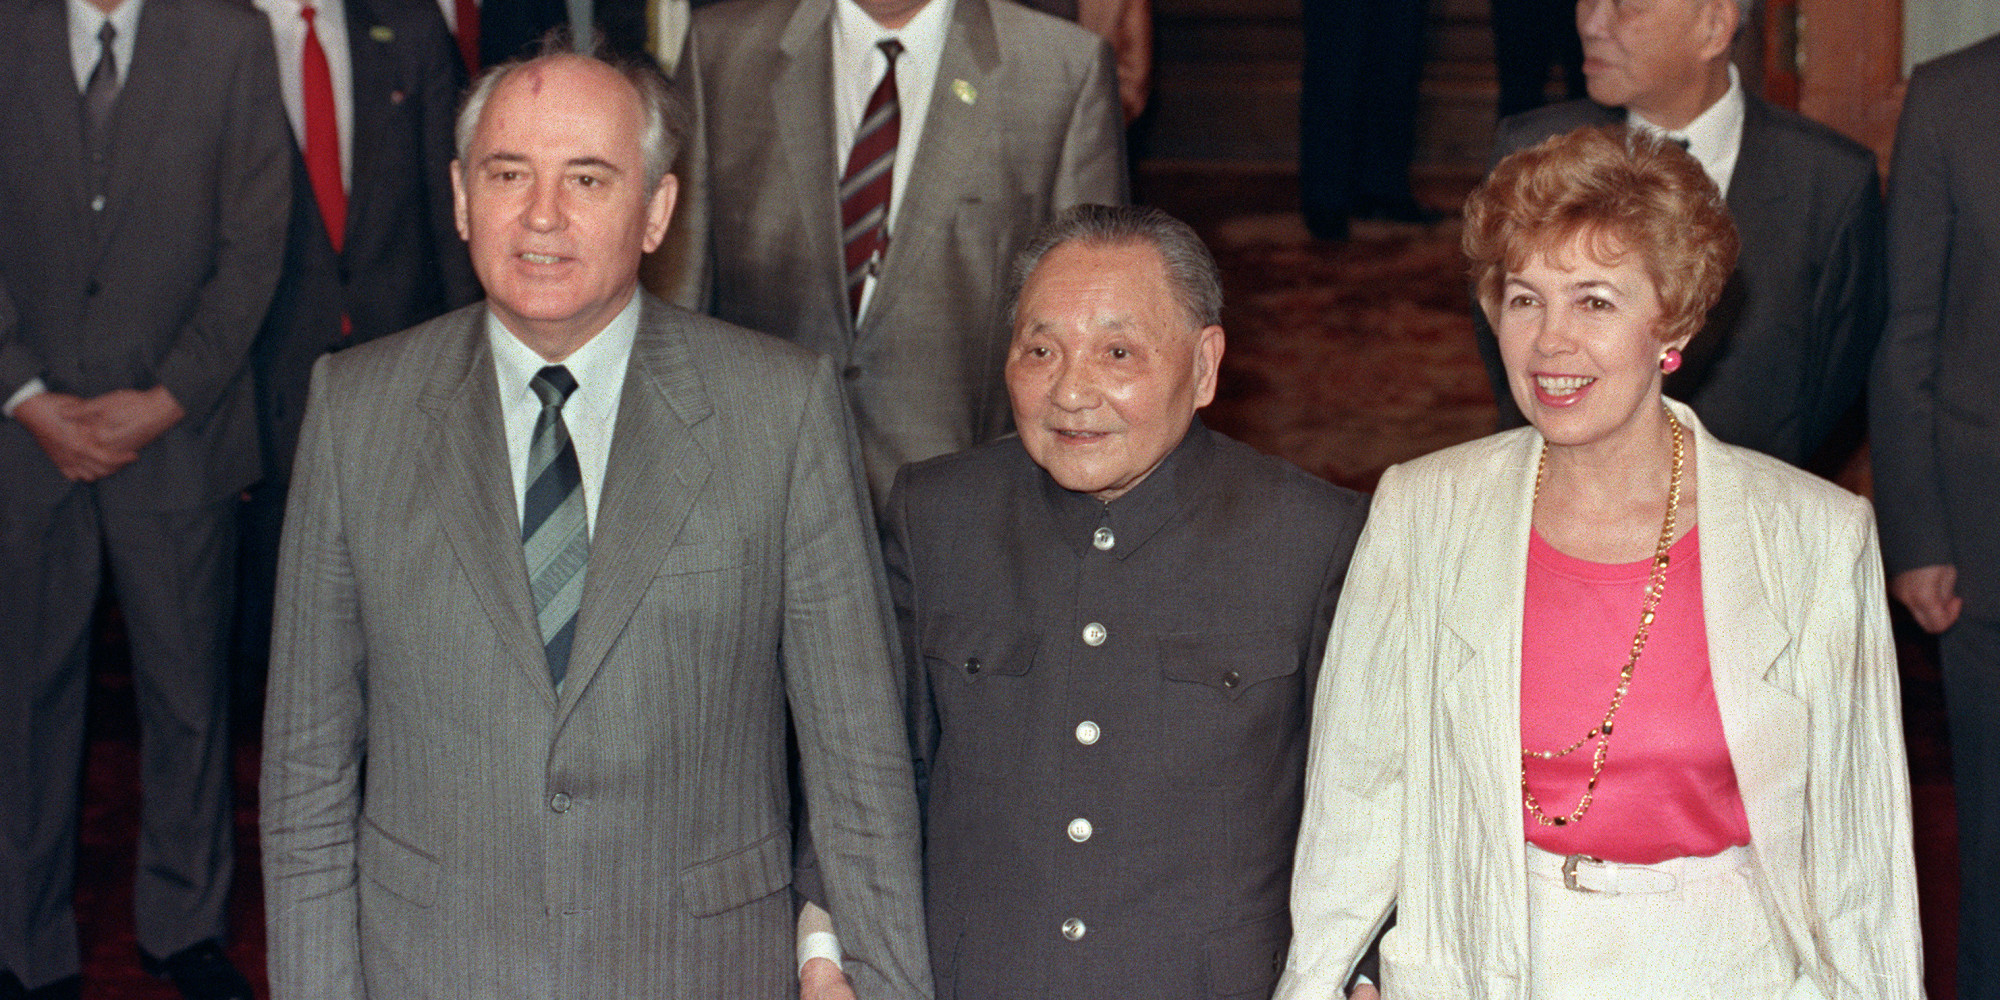 Deng Xiaoping on Gorbachev: 'This Man May Look Smart but in Fact Is Stupid.'